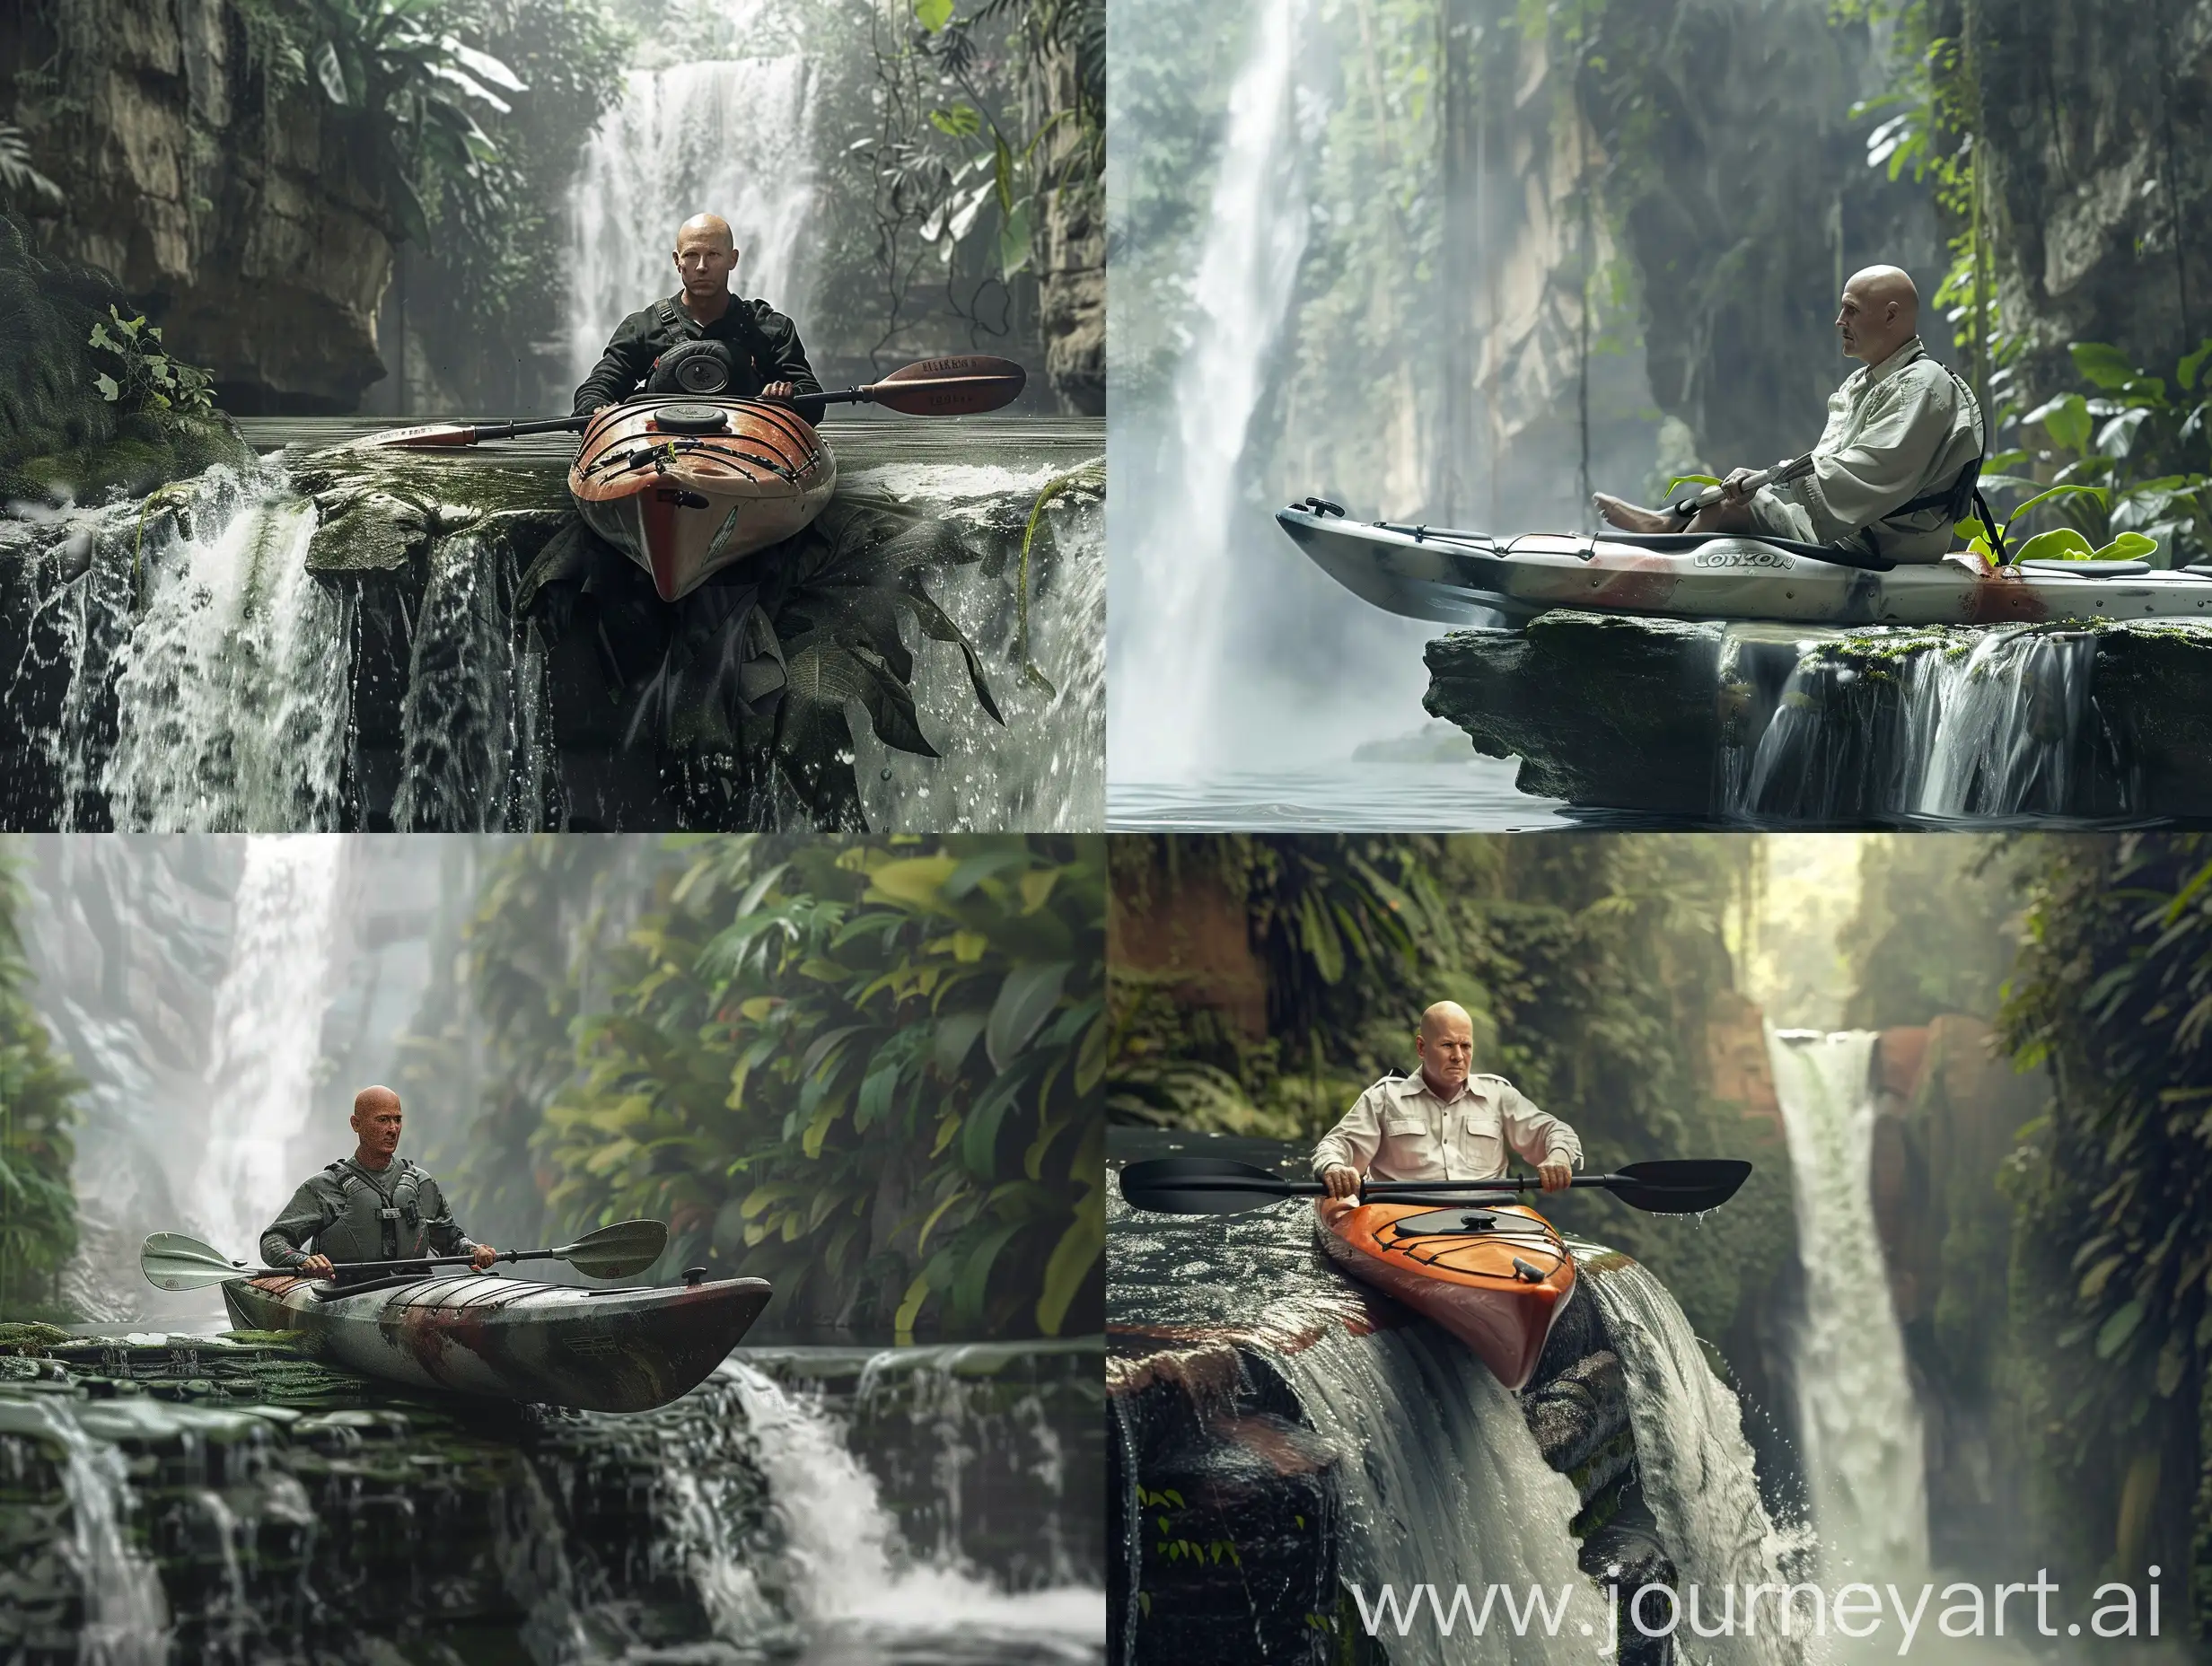 Quality at 300dpi
Very high realism
Content: A kayaker sitting in a kayak at the edge of a waterfall.The kayaker is a 50-year-old white male. He is bald. Frontal shot. The background features a canyon covered in lush vegetation. It's important that the close-up allows the kayaker's face to be recognizable, enabling identification of the individual.